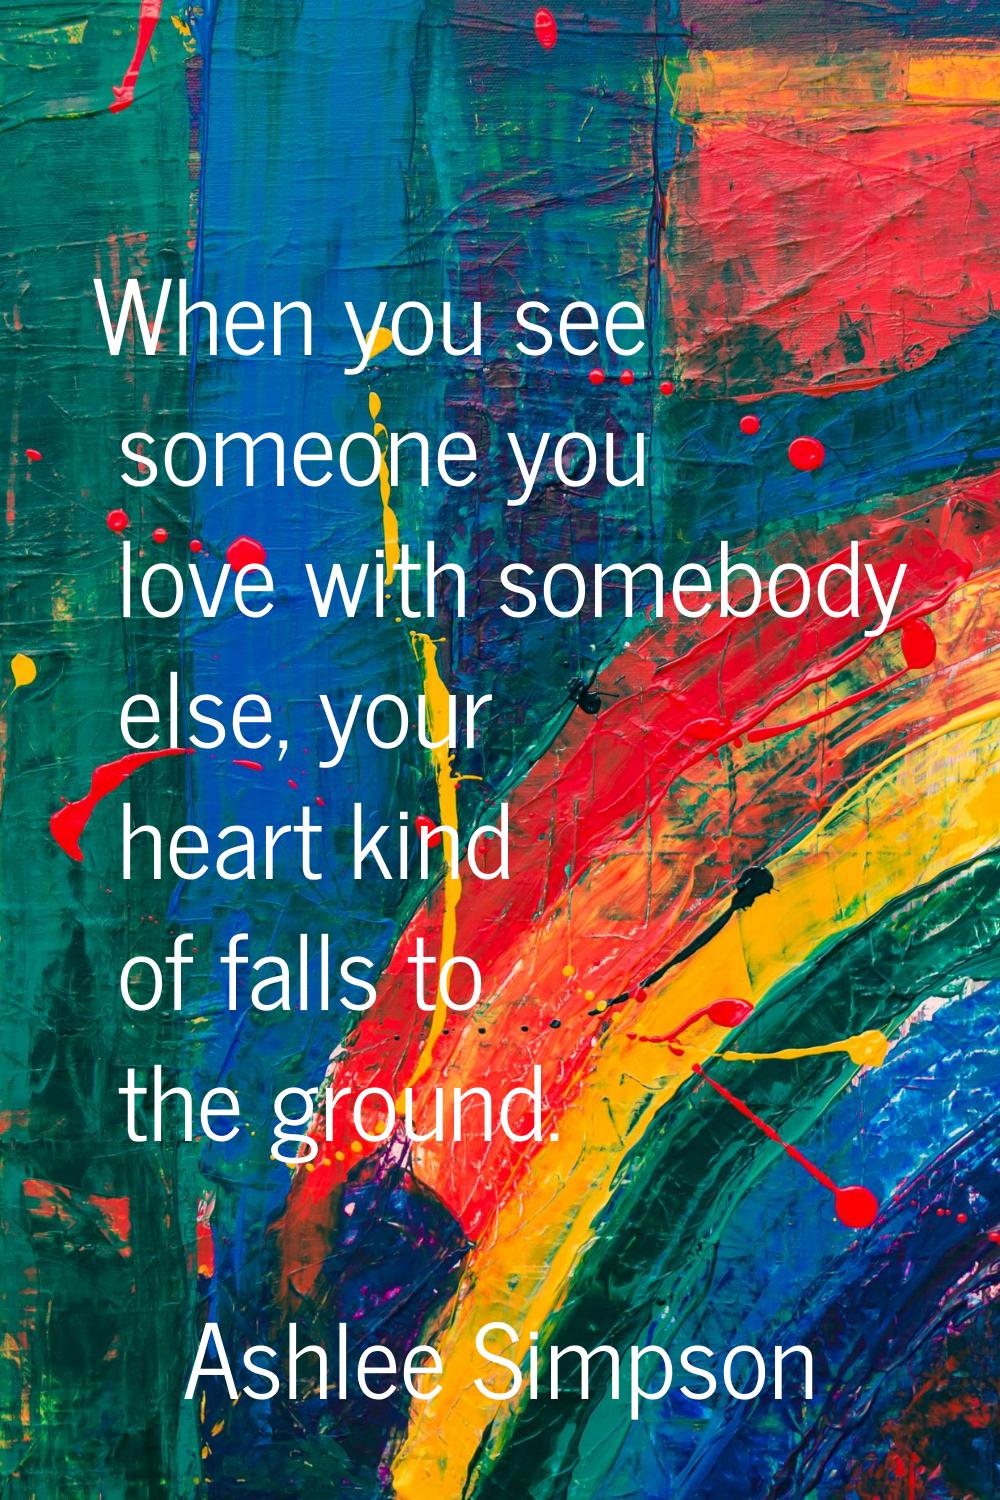 When you see someone you love with somebody else, your heart kind of falls to the ground.